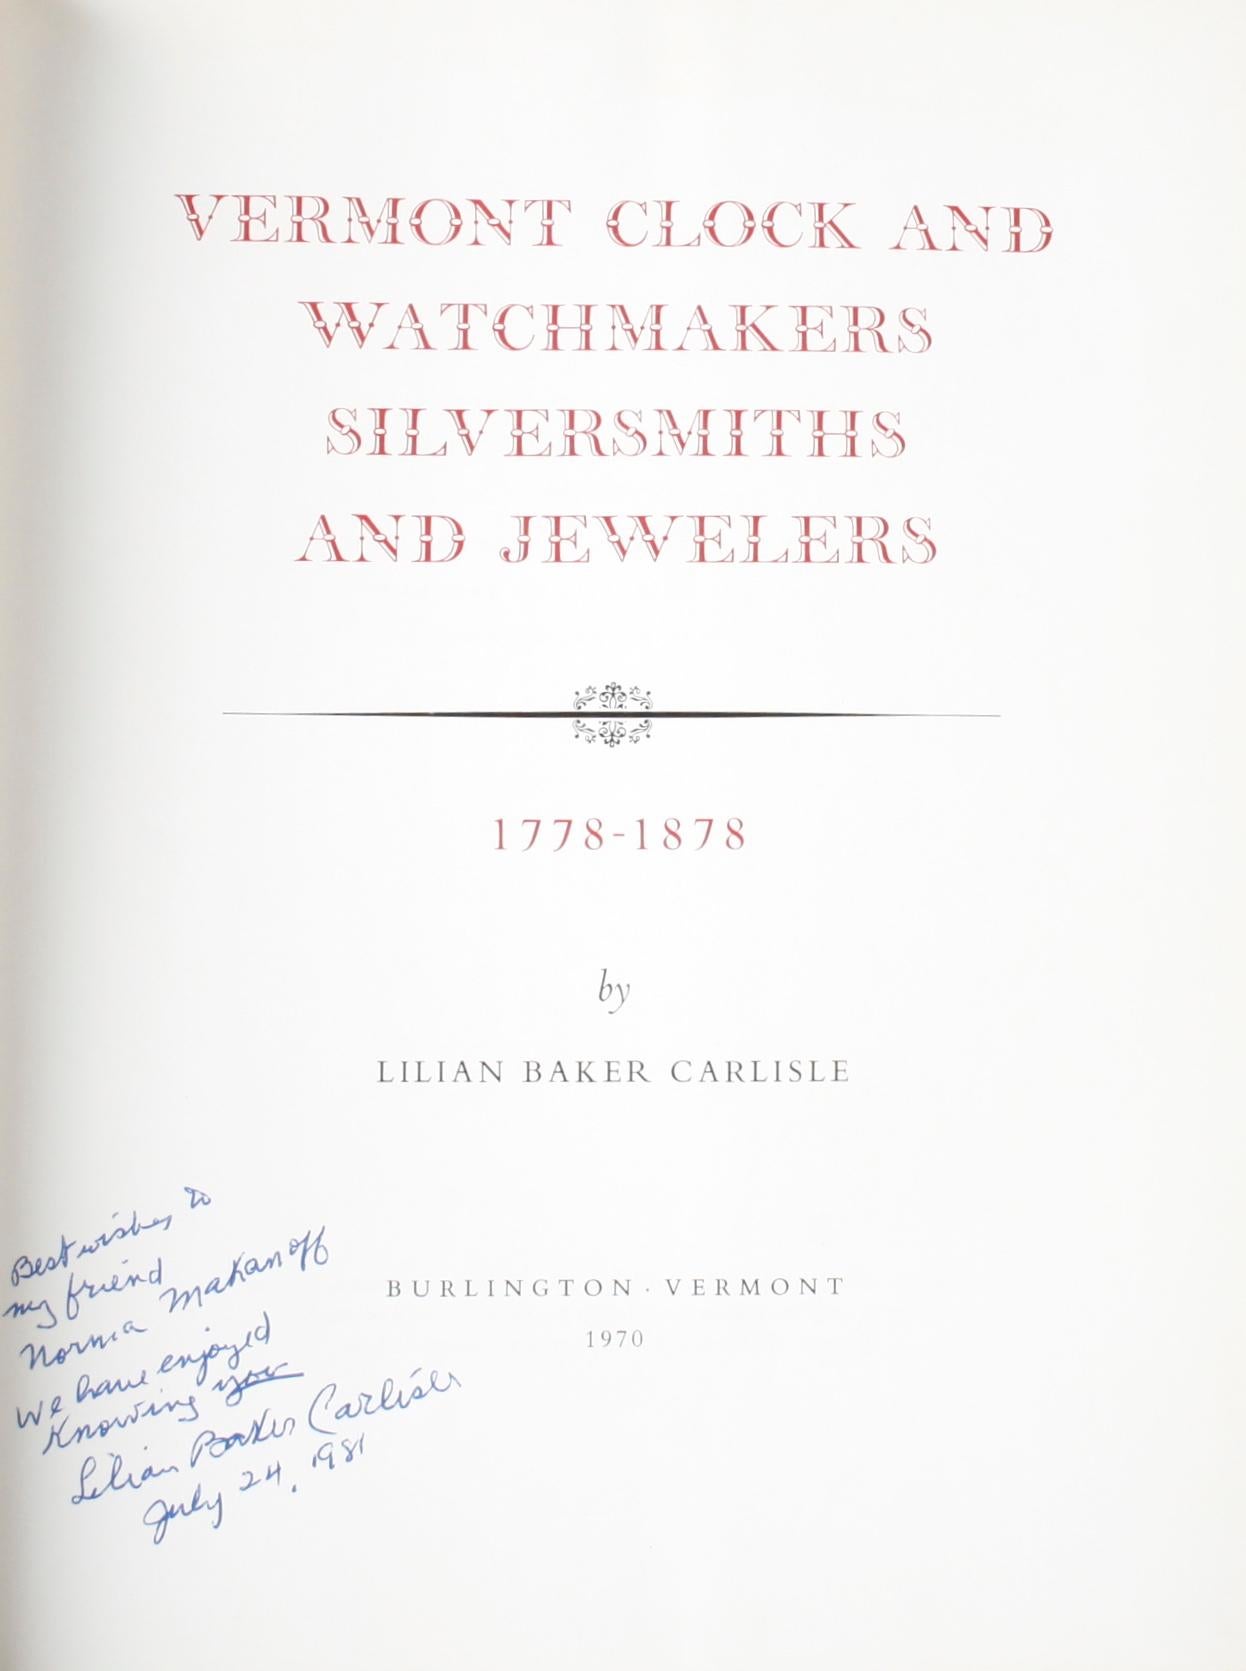 Vermont Clock and Watchmakers, Silversmiths, and Jewelers, 1778-1878 by Lilian Baker Carlisle. L.B. Carlisle, Burlington VT, 1970. 1st, signed and numbered Ed (#601/1000) hardcover with dust jacket. Lilian Baker Carlisle developed her knowledge of